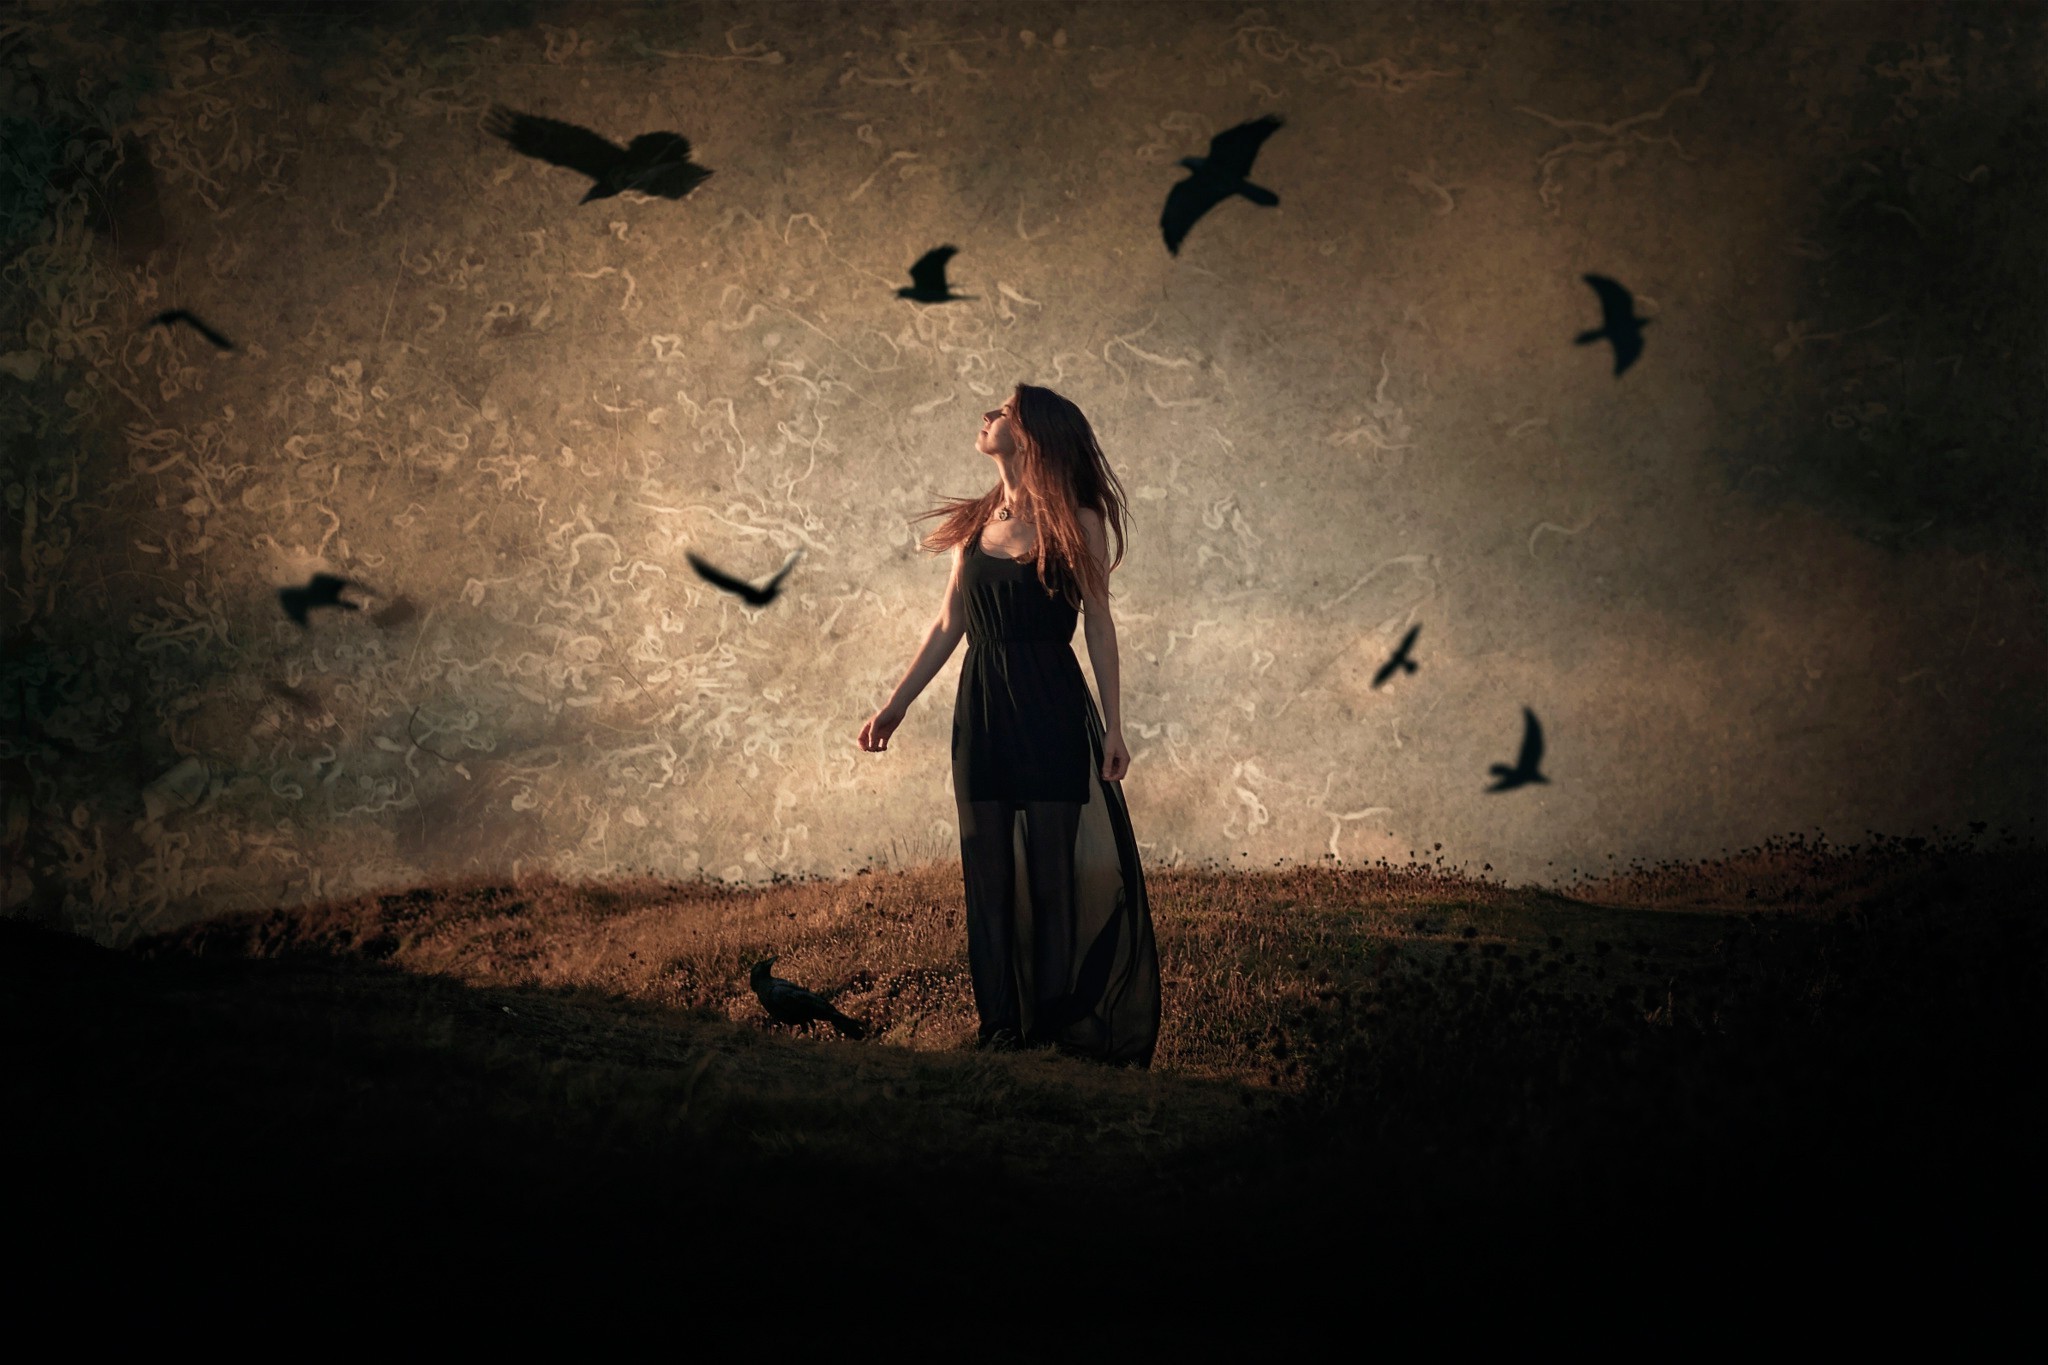 Ravens circling over a girl in a black dress.